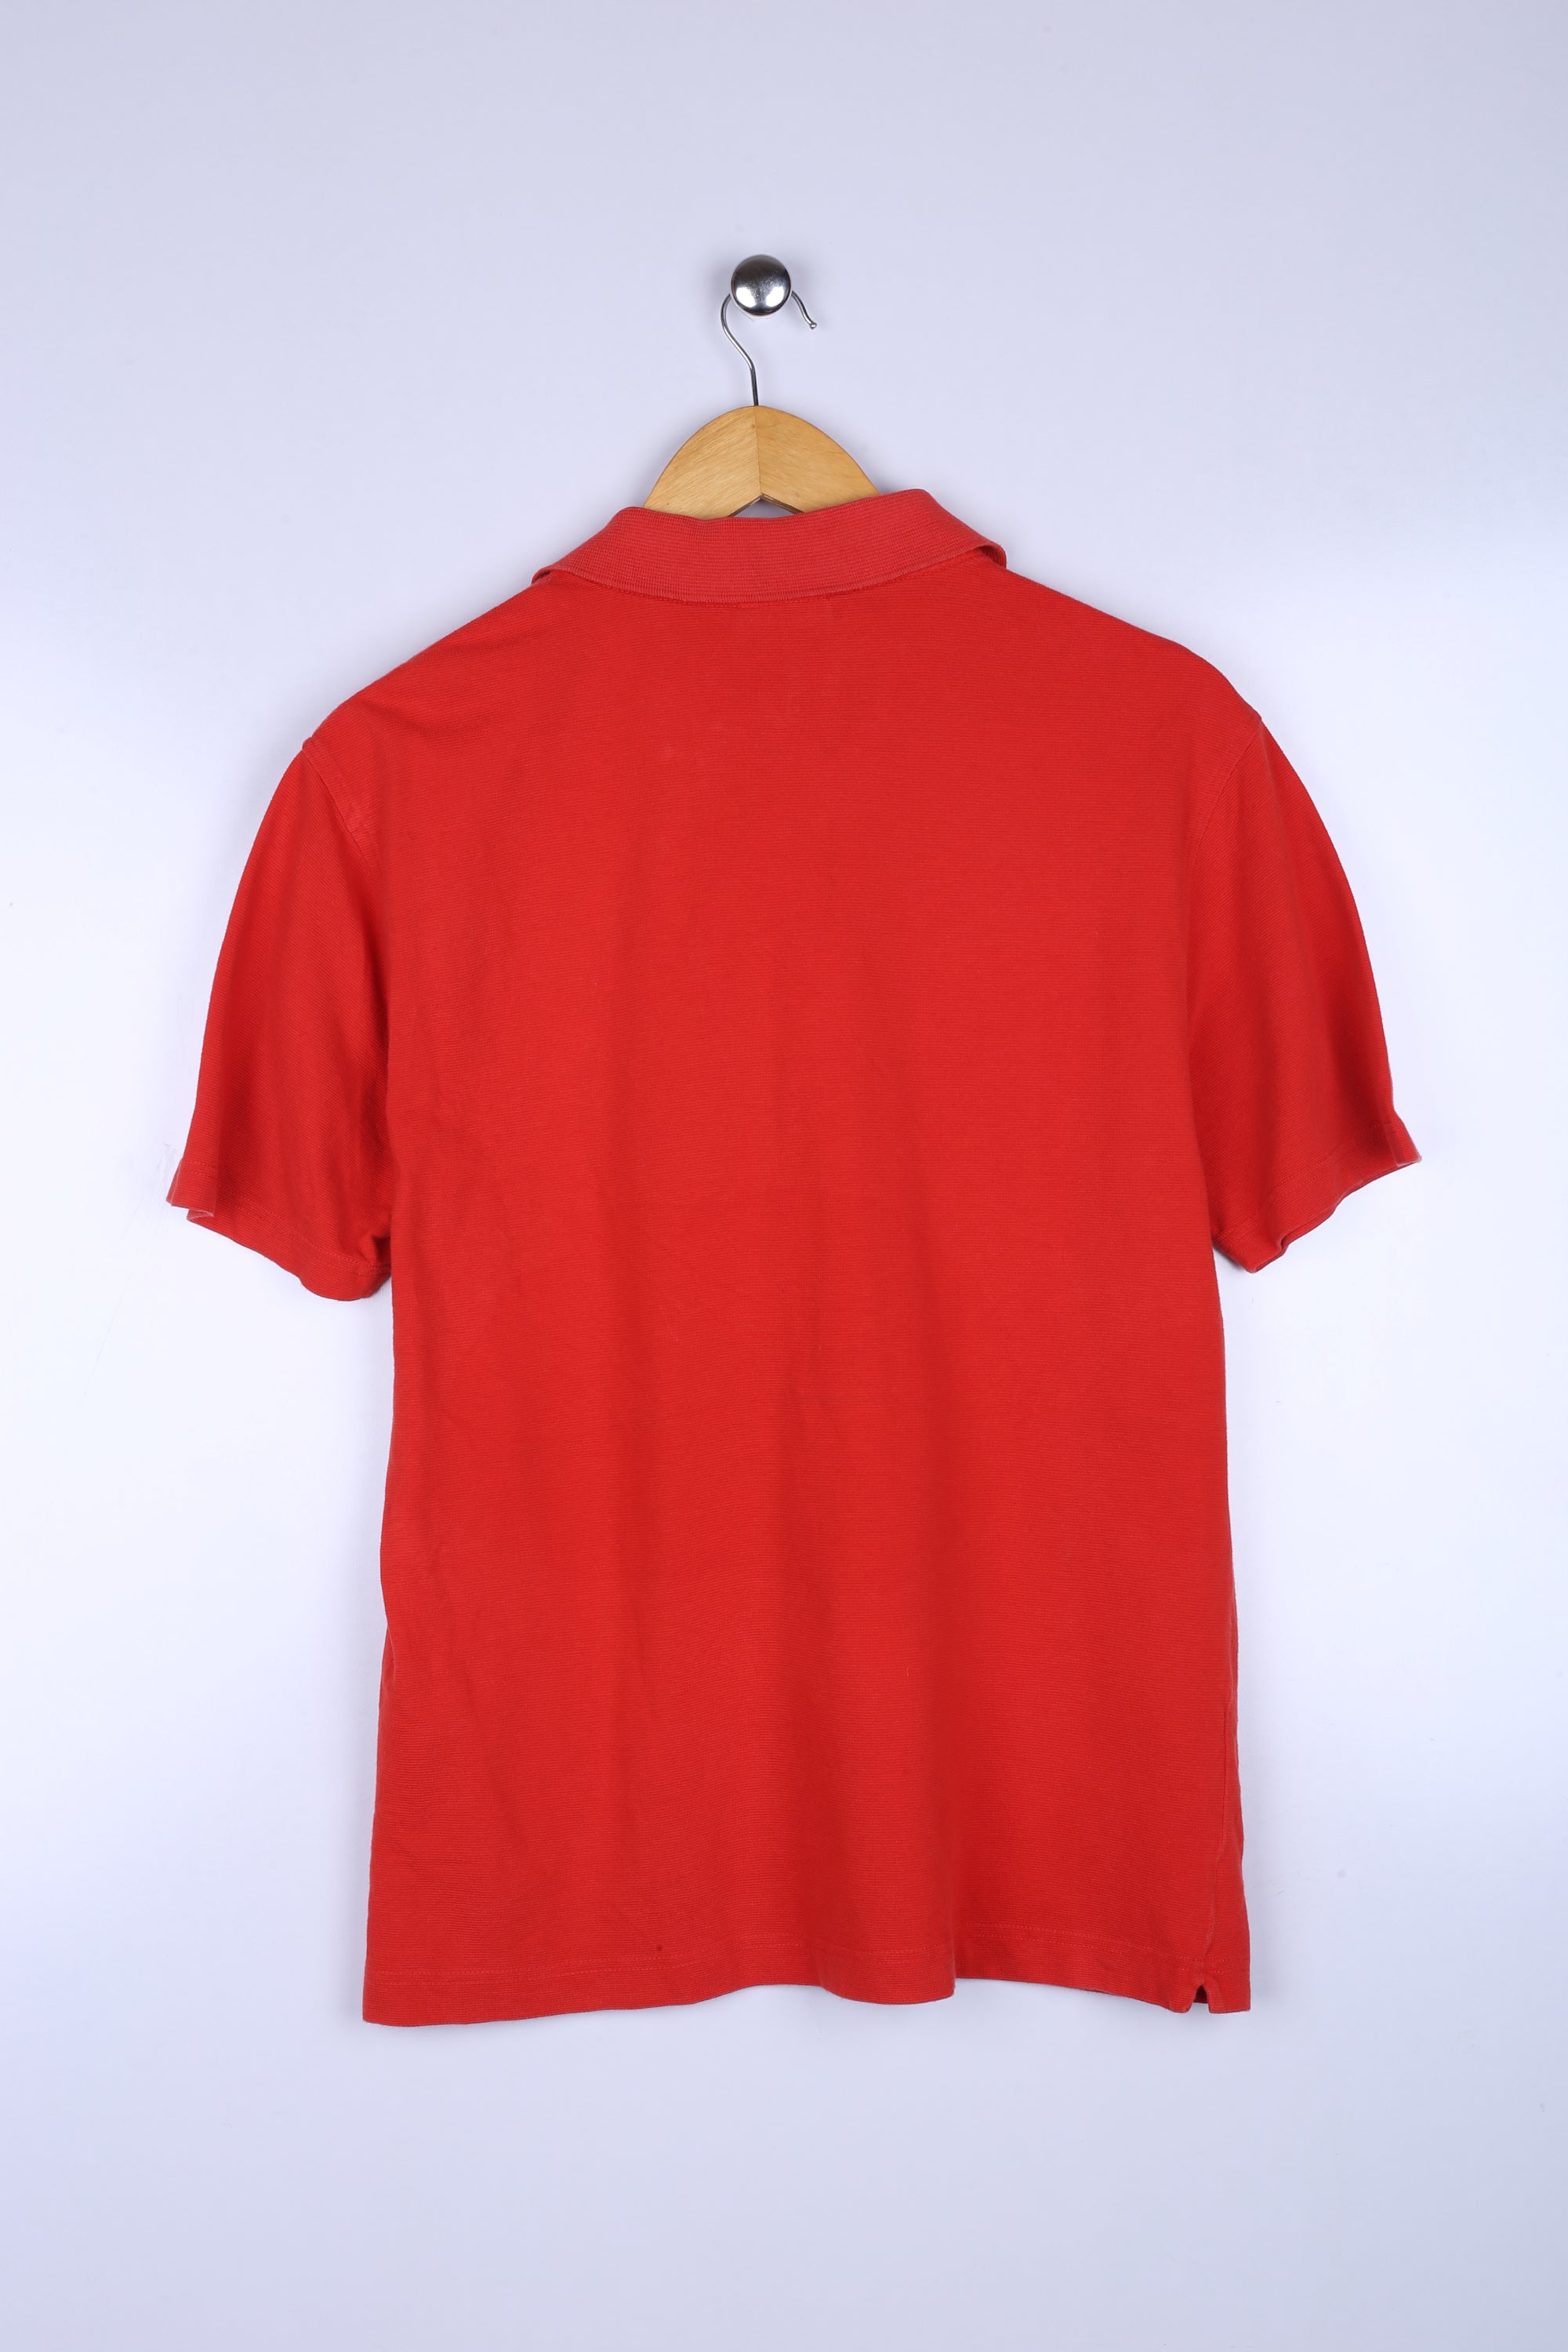 Vintage 90's Lacoste Polo Red